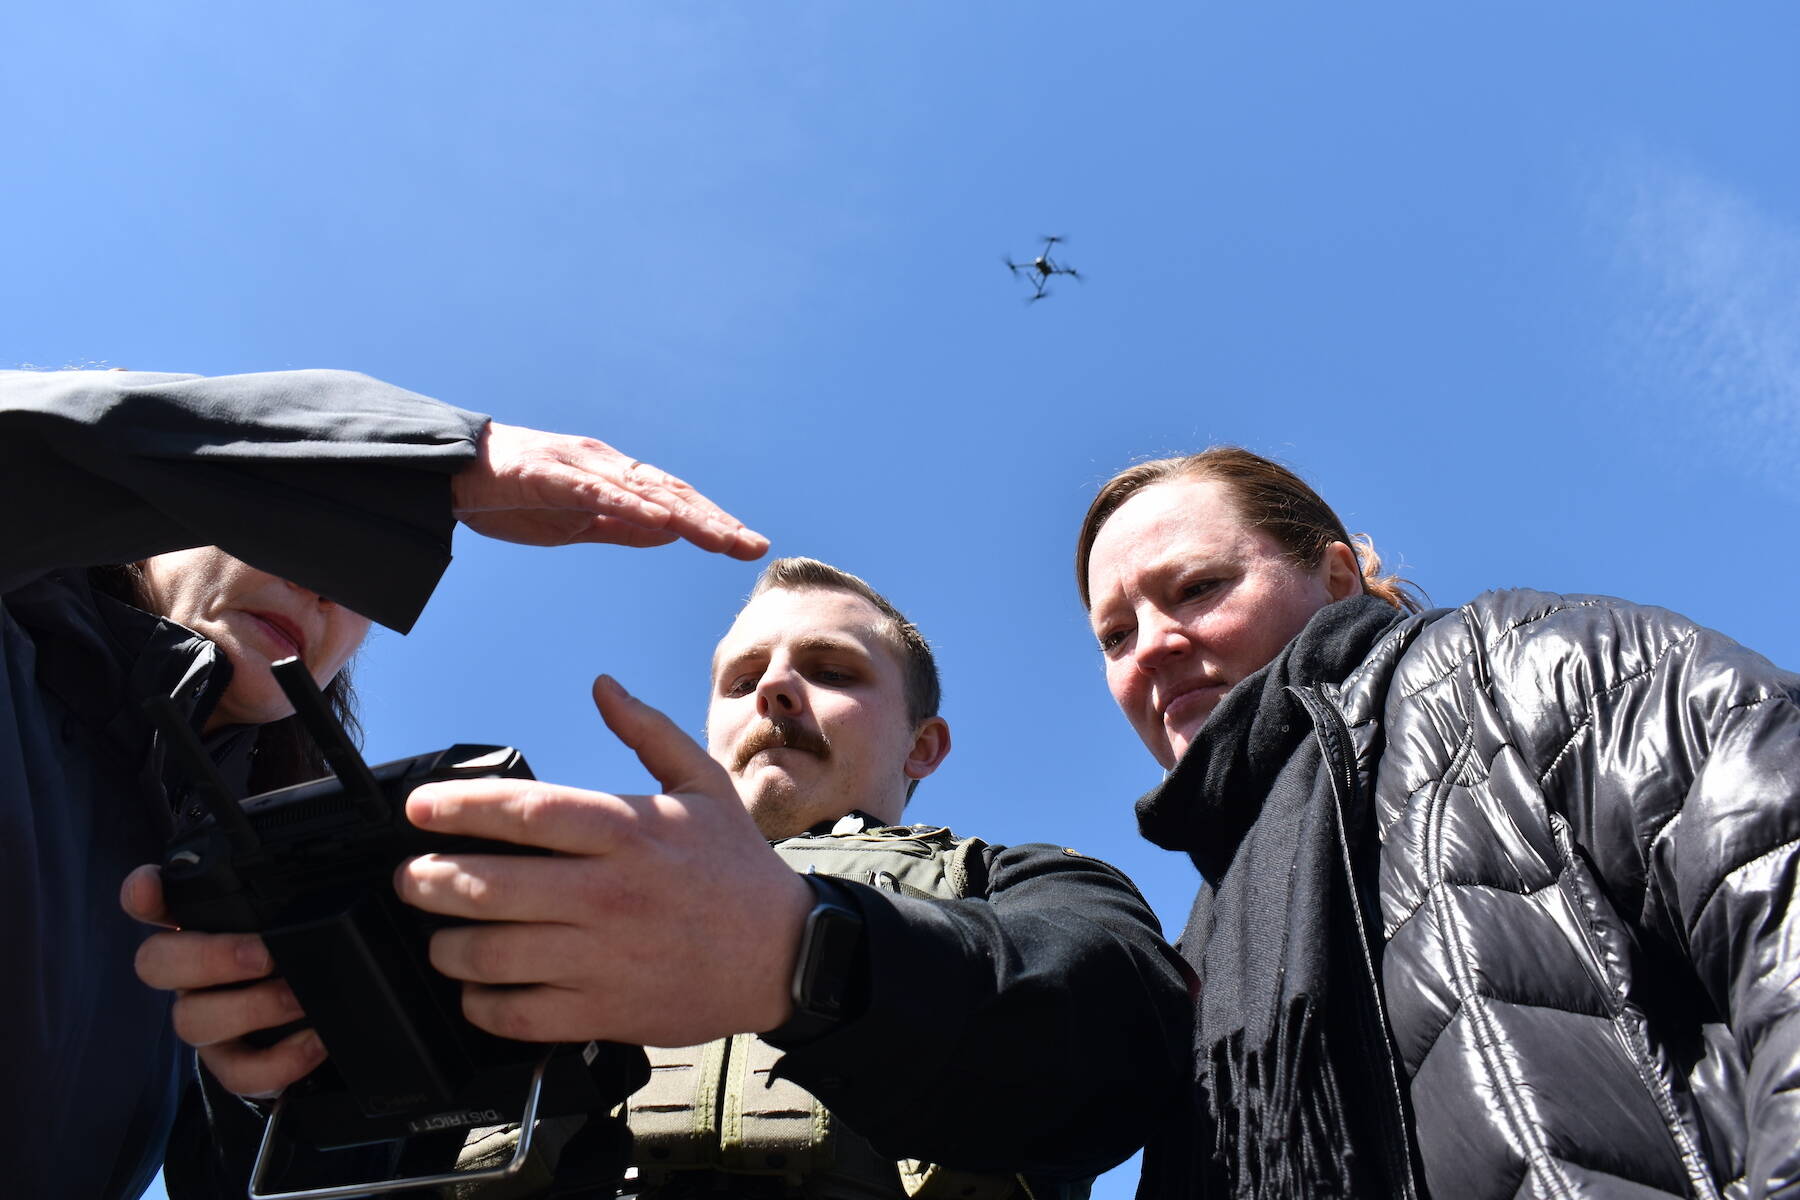 Kelley Balcomb-Bartok / Staff photo
San Juan County Sheriff Deputy Isaac Norton flies the department’s new drone as San Juan County Council members Jane Fuller (left) and Christine Minney (right) watch through the drone’s handheld monitor.